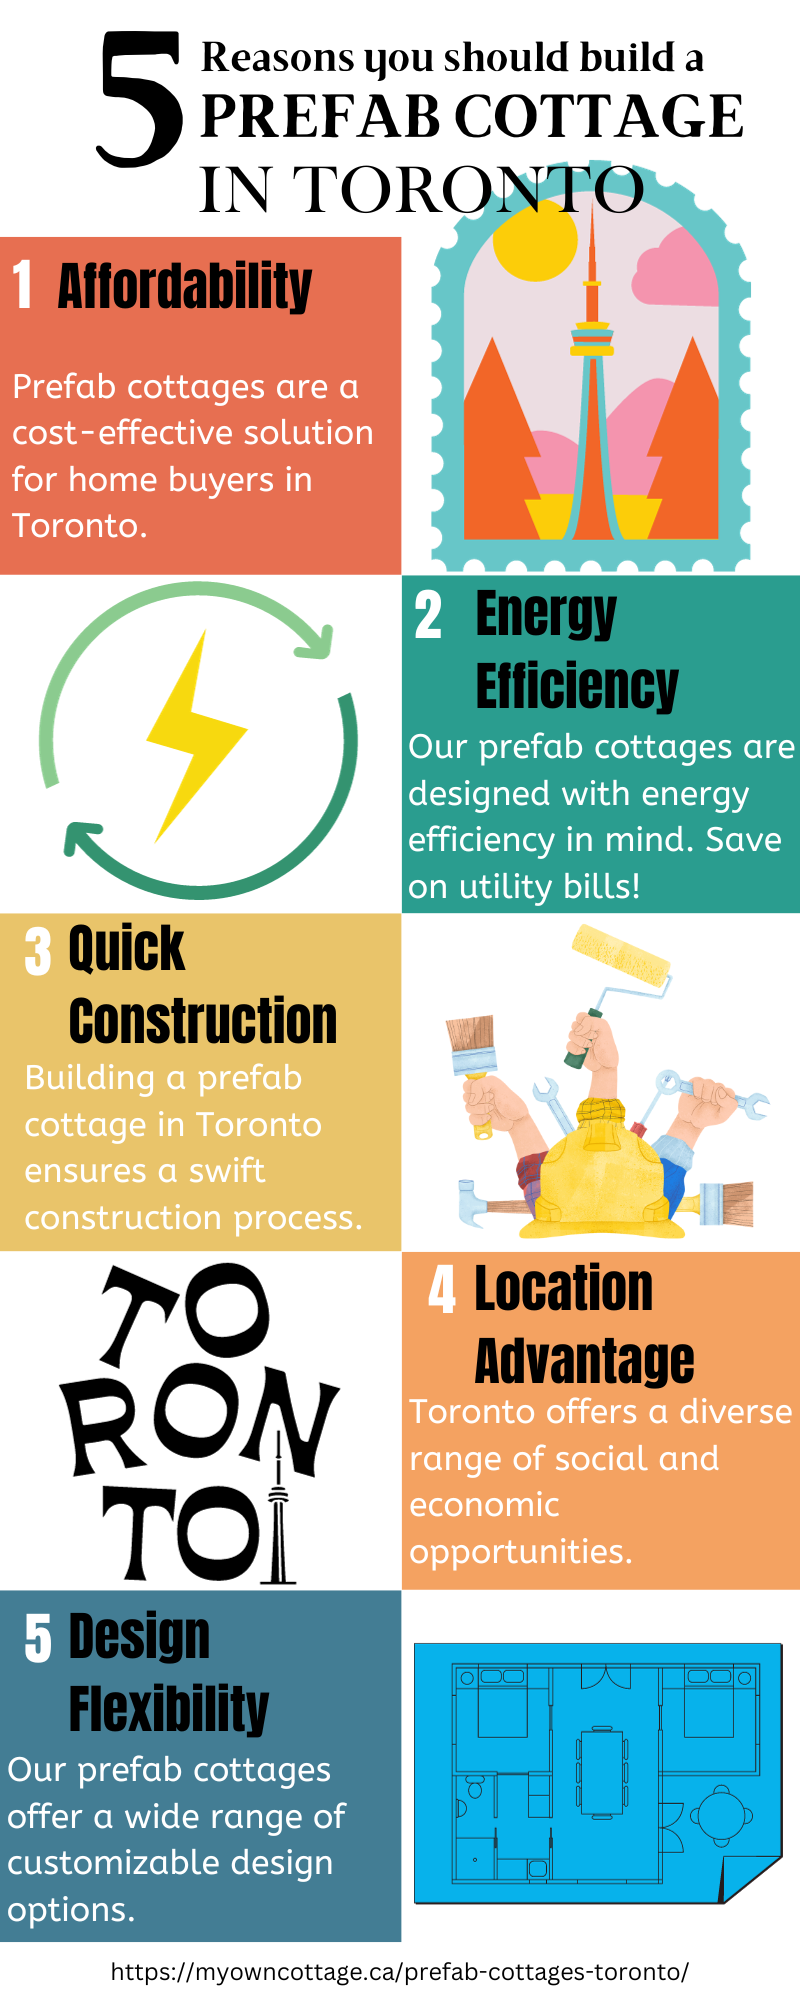 Infographic-For-Prefab-Cottages-Toronto-Advantages-and-Reasons-to-Build